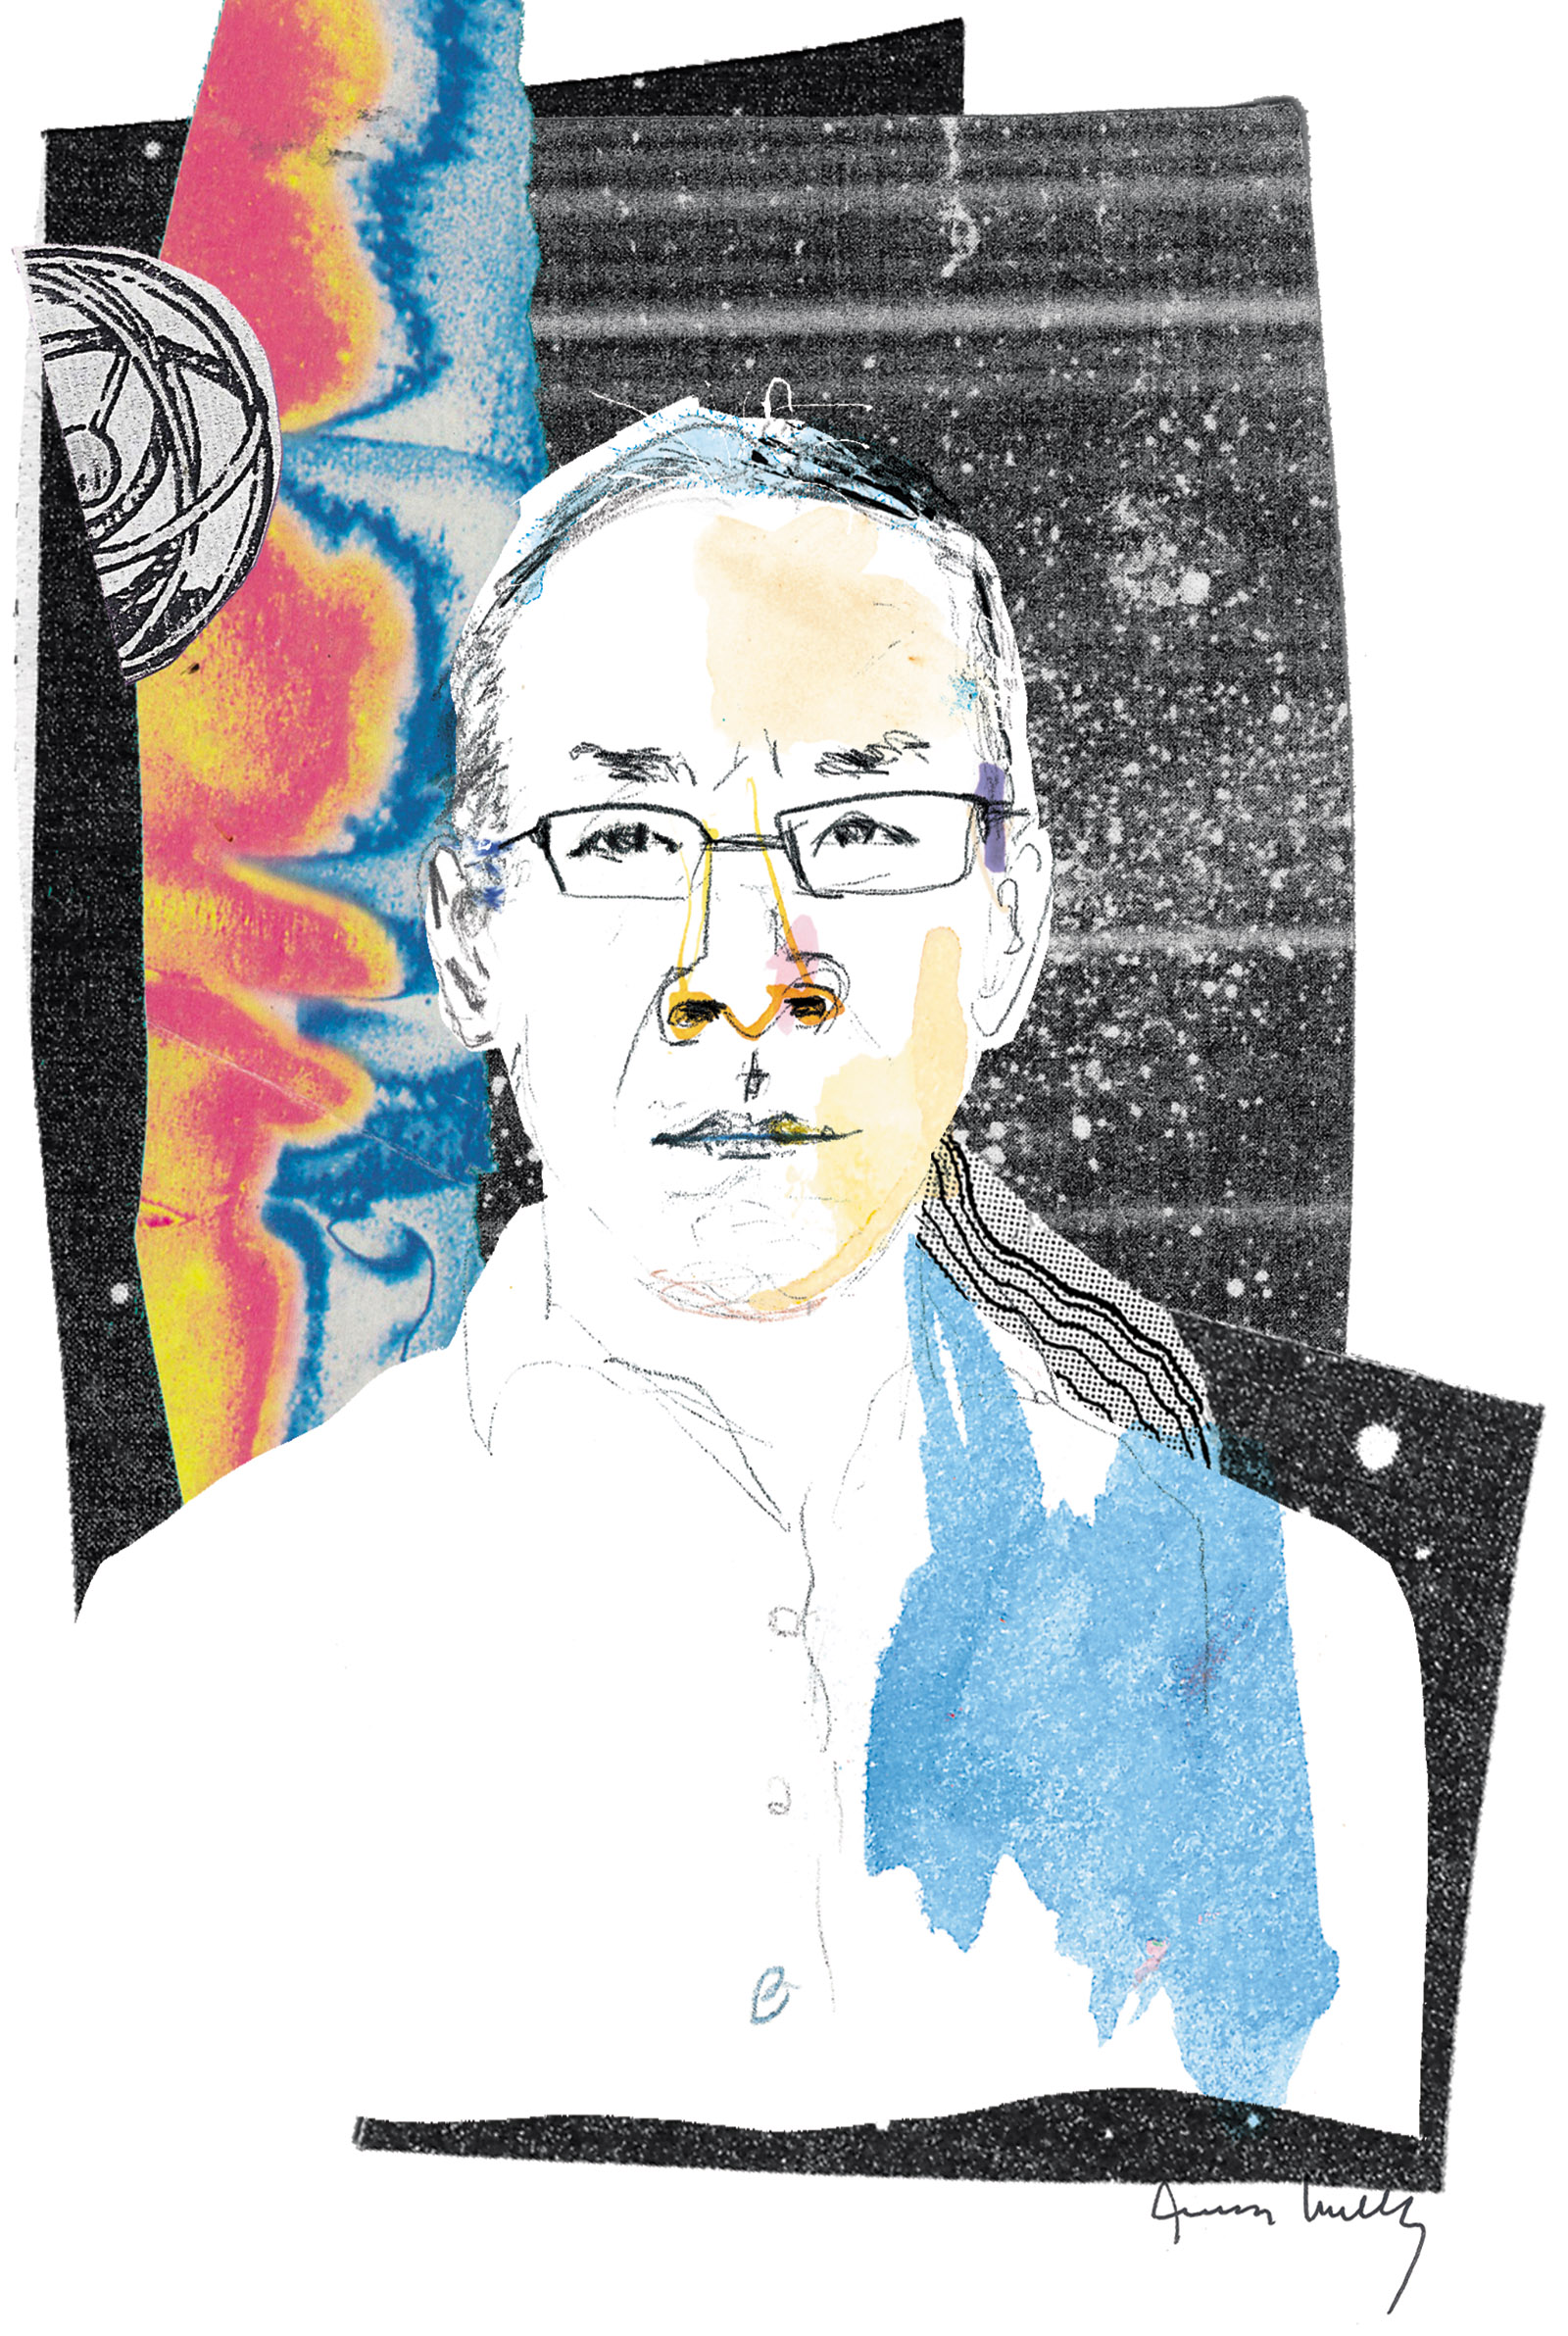 Ted Chiang; illustration by Joanna Neborsky